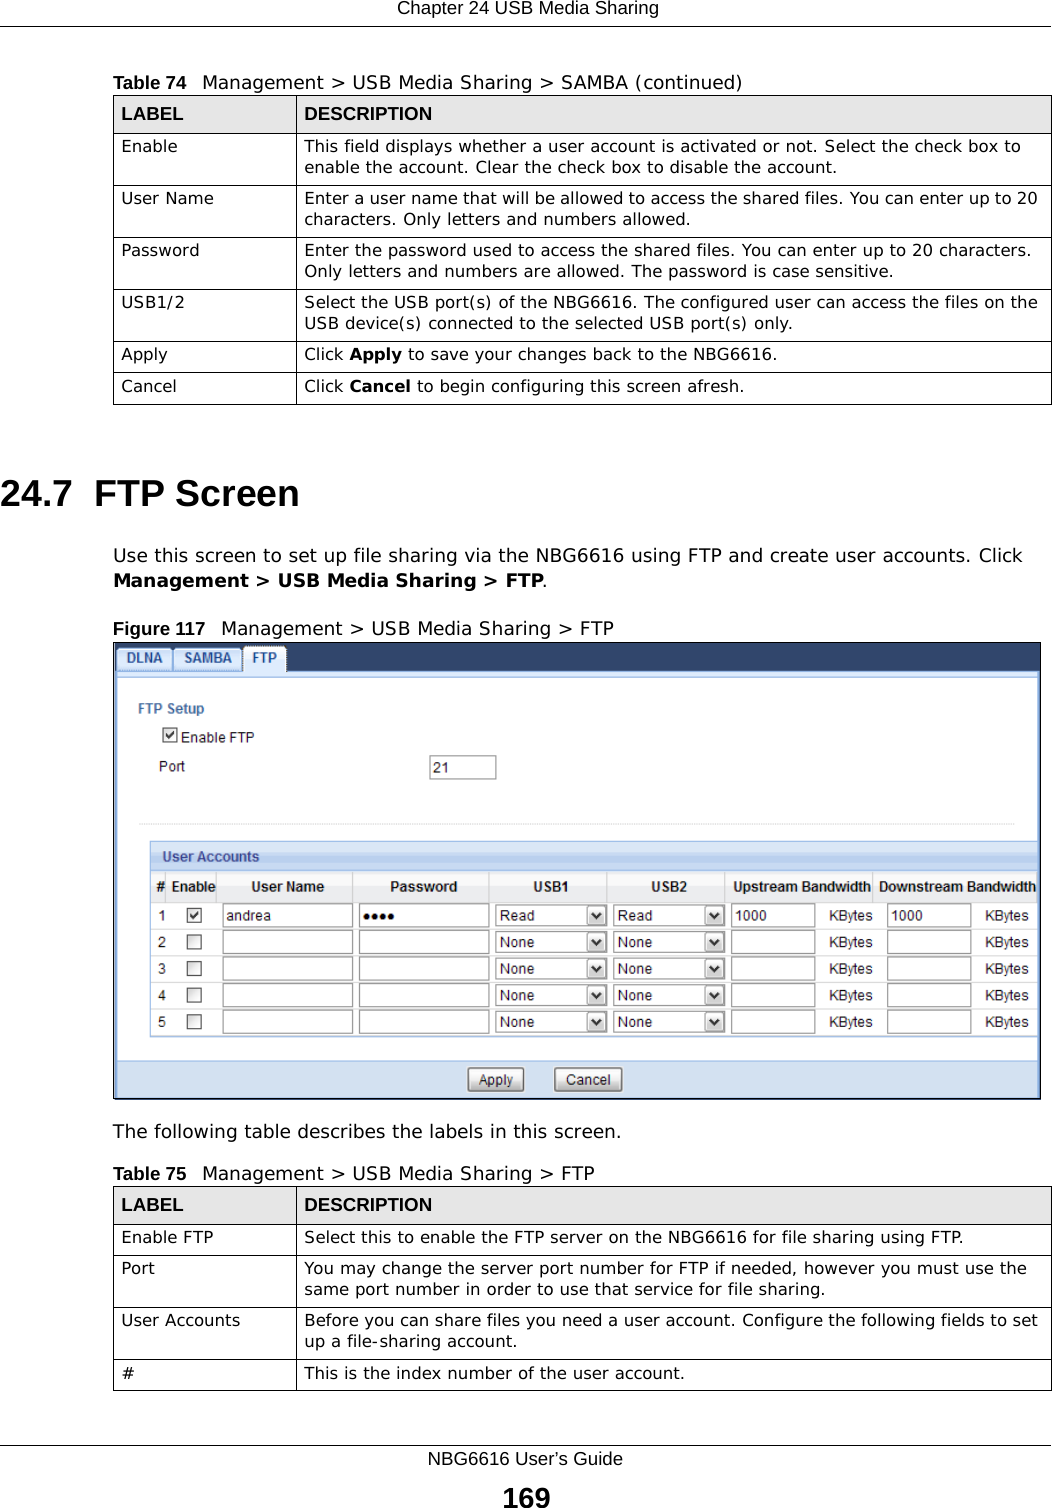  Chapter 24 USB Media SharingNBG6616 User’s Guide16924.7  FTP ScreenUse this screen to set up file sharing via the NBG6616 using FTP and create user accounts. Click Management &gt; USB Media Sharing &gt; FTP.Figure 117   Management &gt; USB Media Sharing &gt; FTP The following table describes the labels in this screen.Enable This field displays whether a user account is activated or not. Select the check box to enable the account. Clear the check box to disable the account.User Name Enter a user name that will be allowed to access the shared files. You can enter up to 20 characters. Only letters and numbers allowed.Password Enter the password used to access the shared files. You can enter up to 20 characters. Only letters and numbers are allowed. The password is case sensitive.USB1/2 Select the USB port(s) of the NBG6616. The configured user can access the files on the USB device(s) connected to the selected USB port(s) only.Apply Click Apply to save your changes back to the NBG6616.Cancel Click Cancel to begin configuring this screen afresh.Table 74   Management &gt; USB Media Sharing &gt; SAMBA (continued)LABEL DESCRIPTIONTable 75   Management &gt; USB Media Sharing &gt; FTPLABEL DESCRIPTIONEnable FTP Select this to enable the FTP server on the NBG6616 for file sharing using FTP.Port You may change the server port number for FTP if needed, however you must use the same port number in order to use that service for file sharing.User Accounts Before you can share files you need a user account. Configure the following fields to set up a file-sharing account. #This is the index number of the user account.